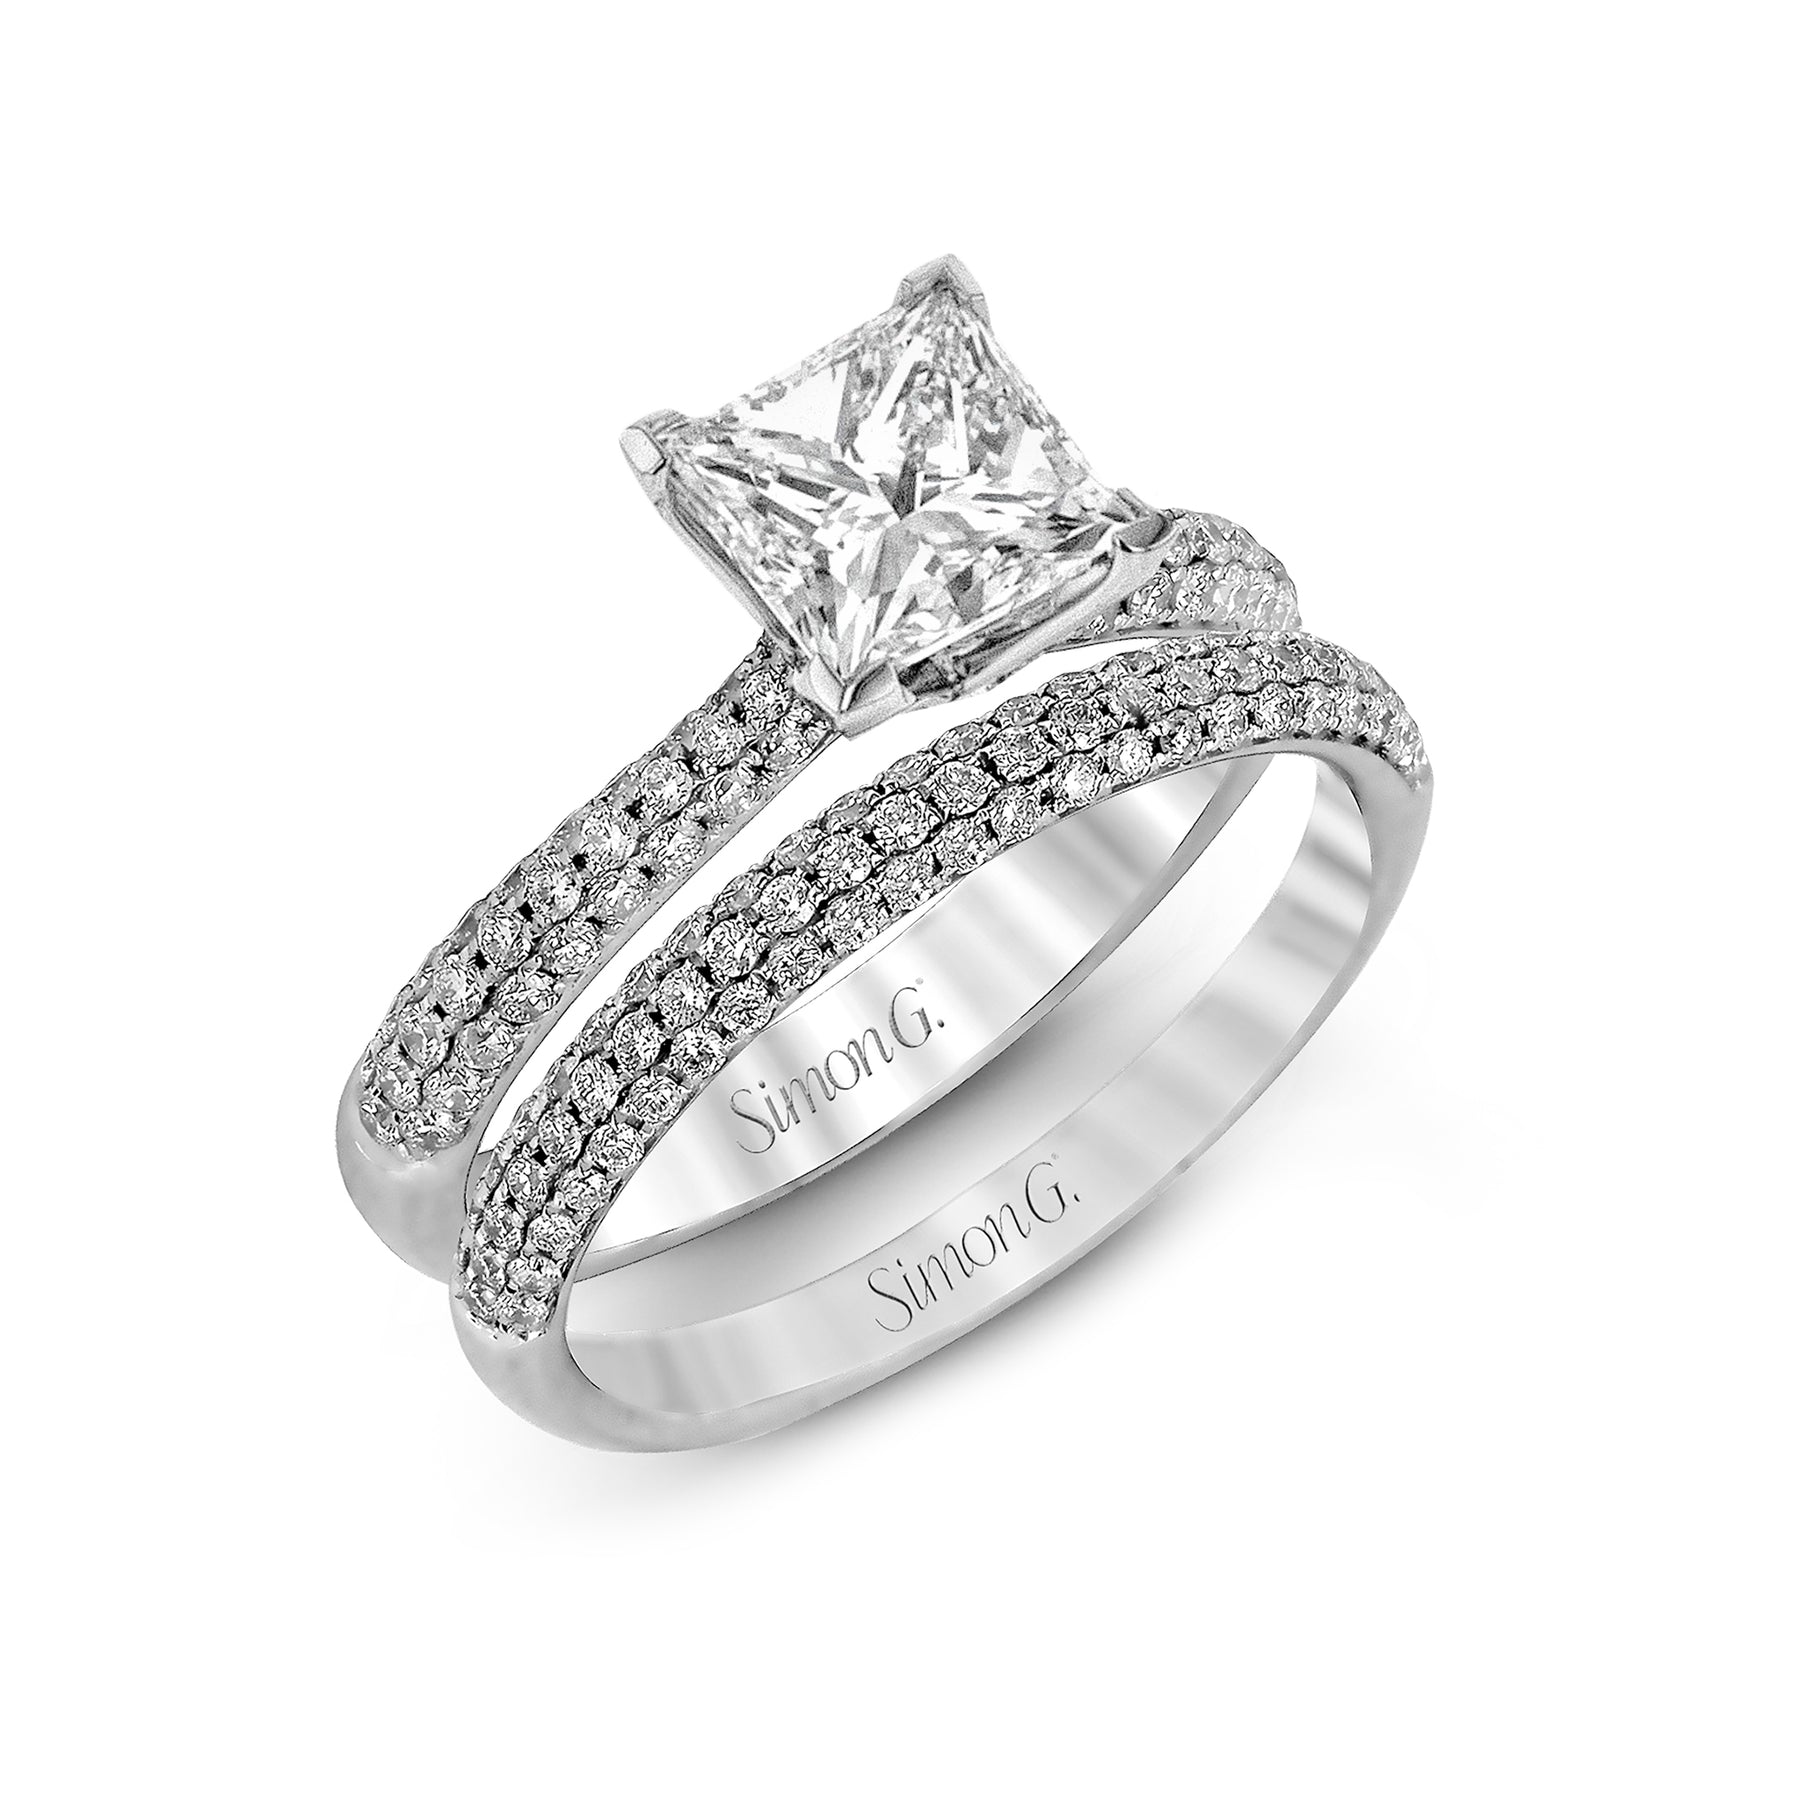 Princess-cut Engagement Ring & Matching Wedding Band in 18k Gold with Diamonds TR431-PC